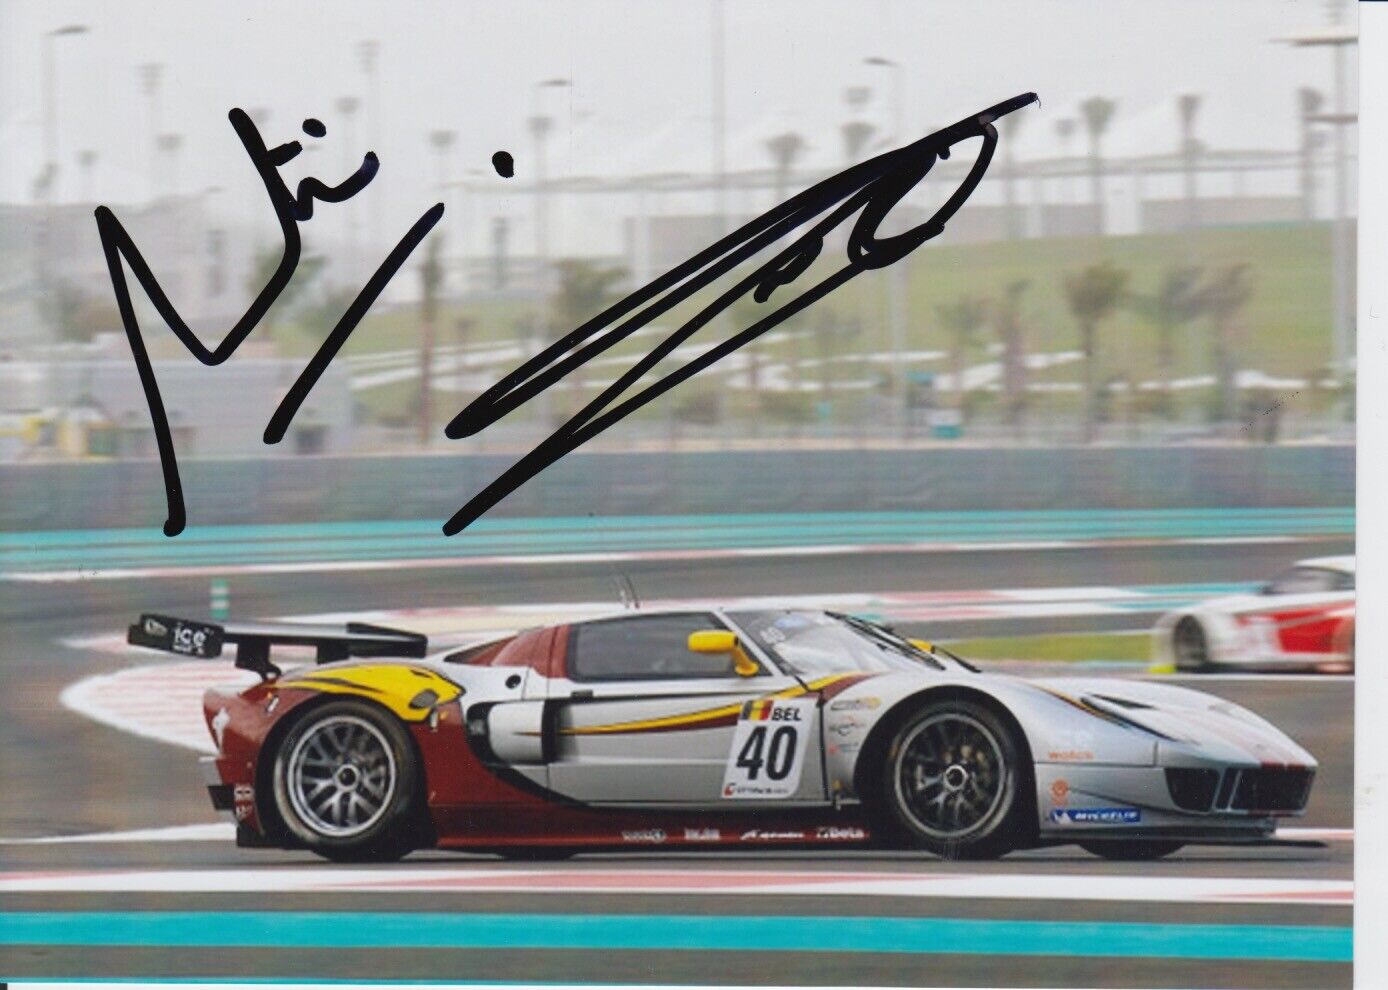 Bas Leinders and Maxime Martin Hand Signed 7x5 Photo Poster painting - FIA GT Championship 2.